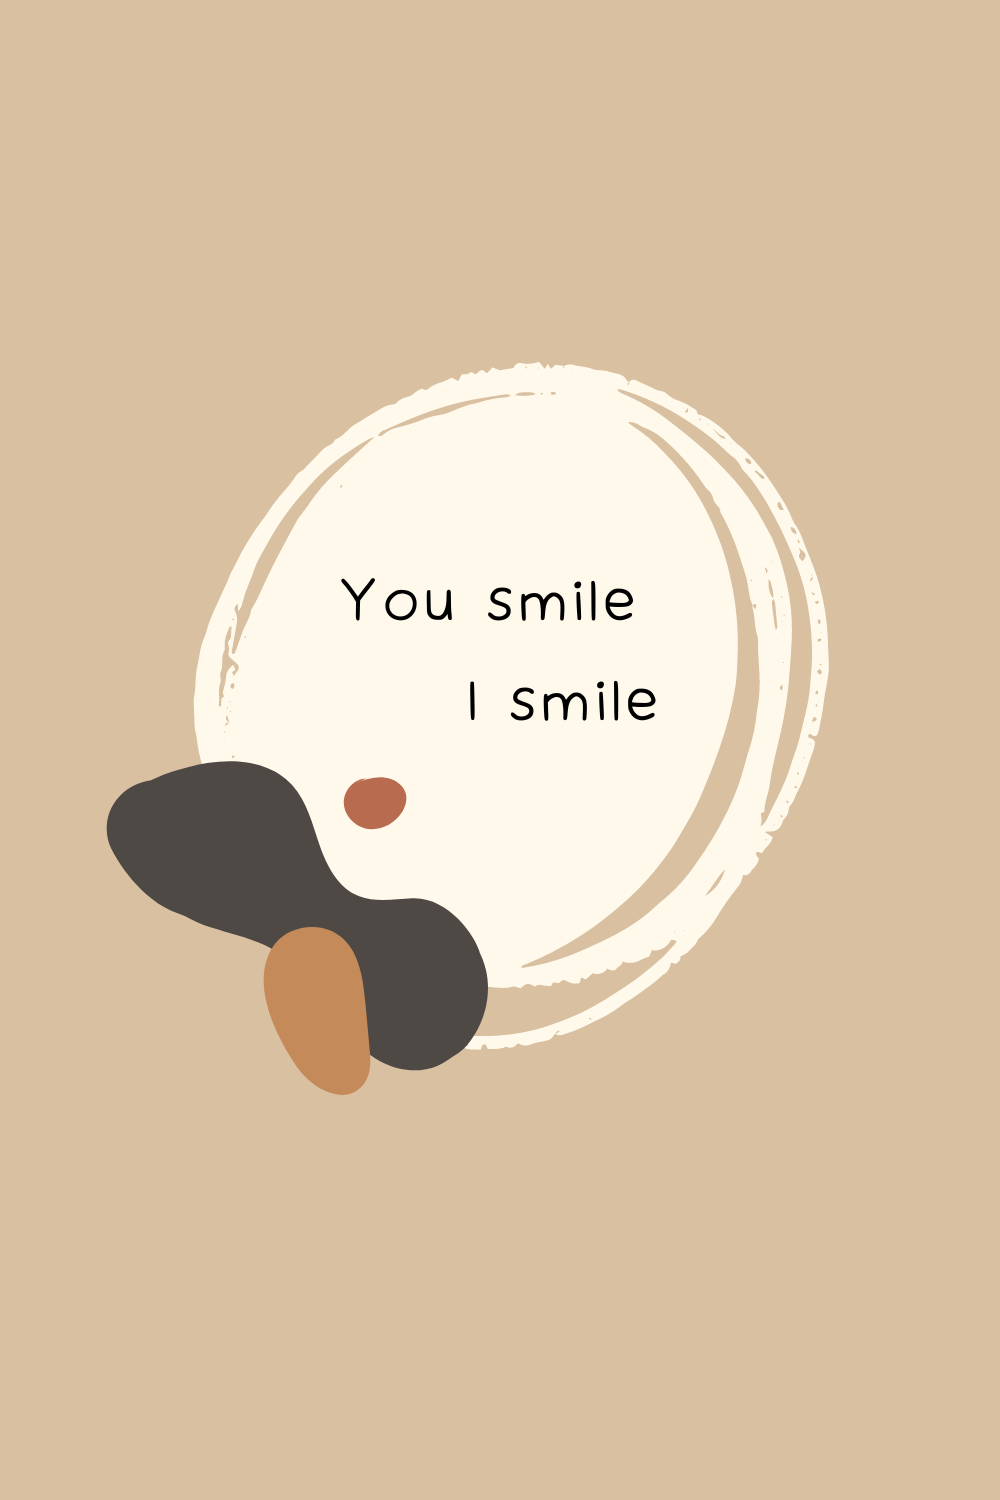 50+ Inspirational Smile Quotes | Art and Design